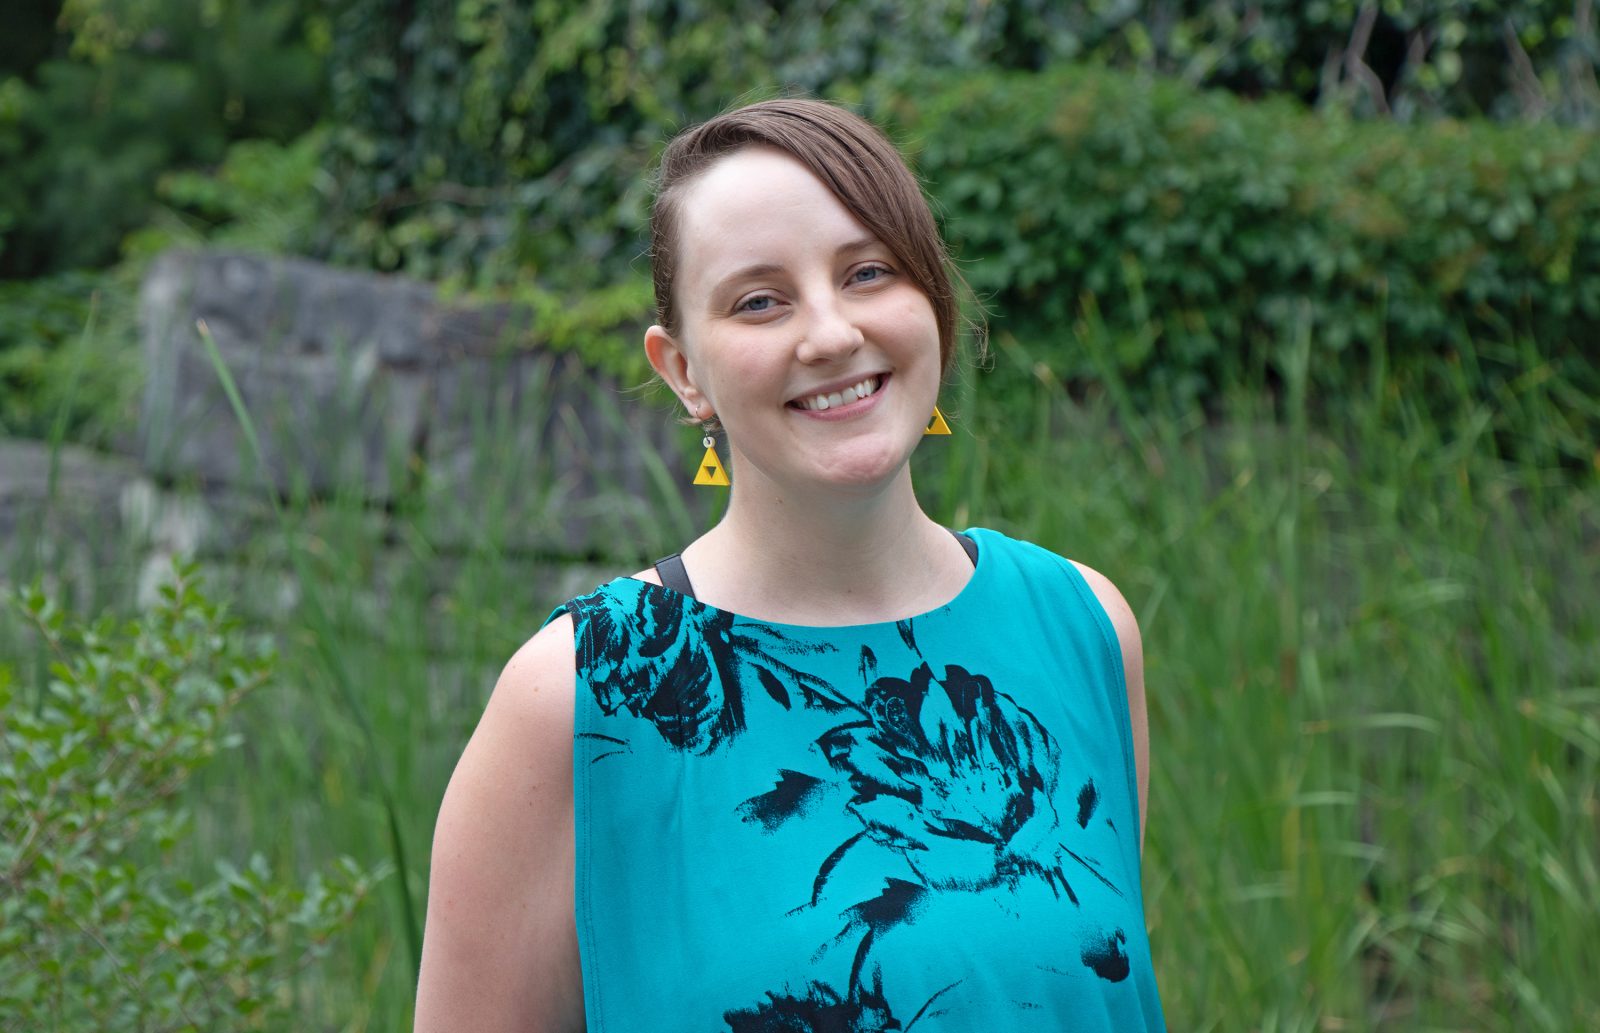 A portrait photo of Assistant Professor Sarah Stang in a sleeveless teal shirt with a large black flower design.